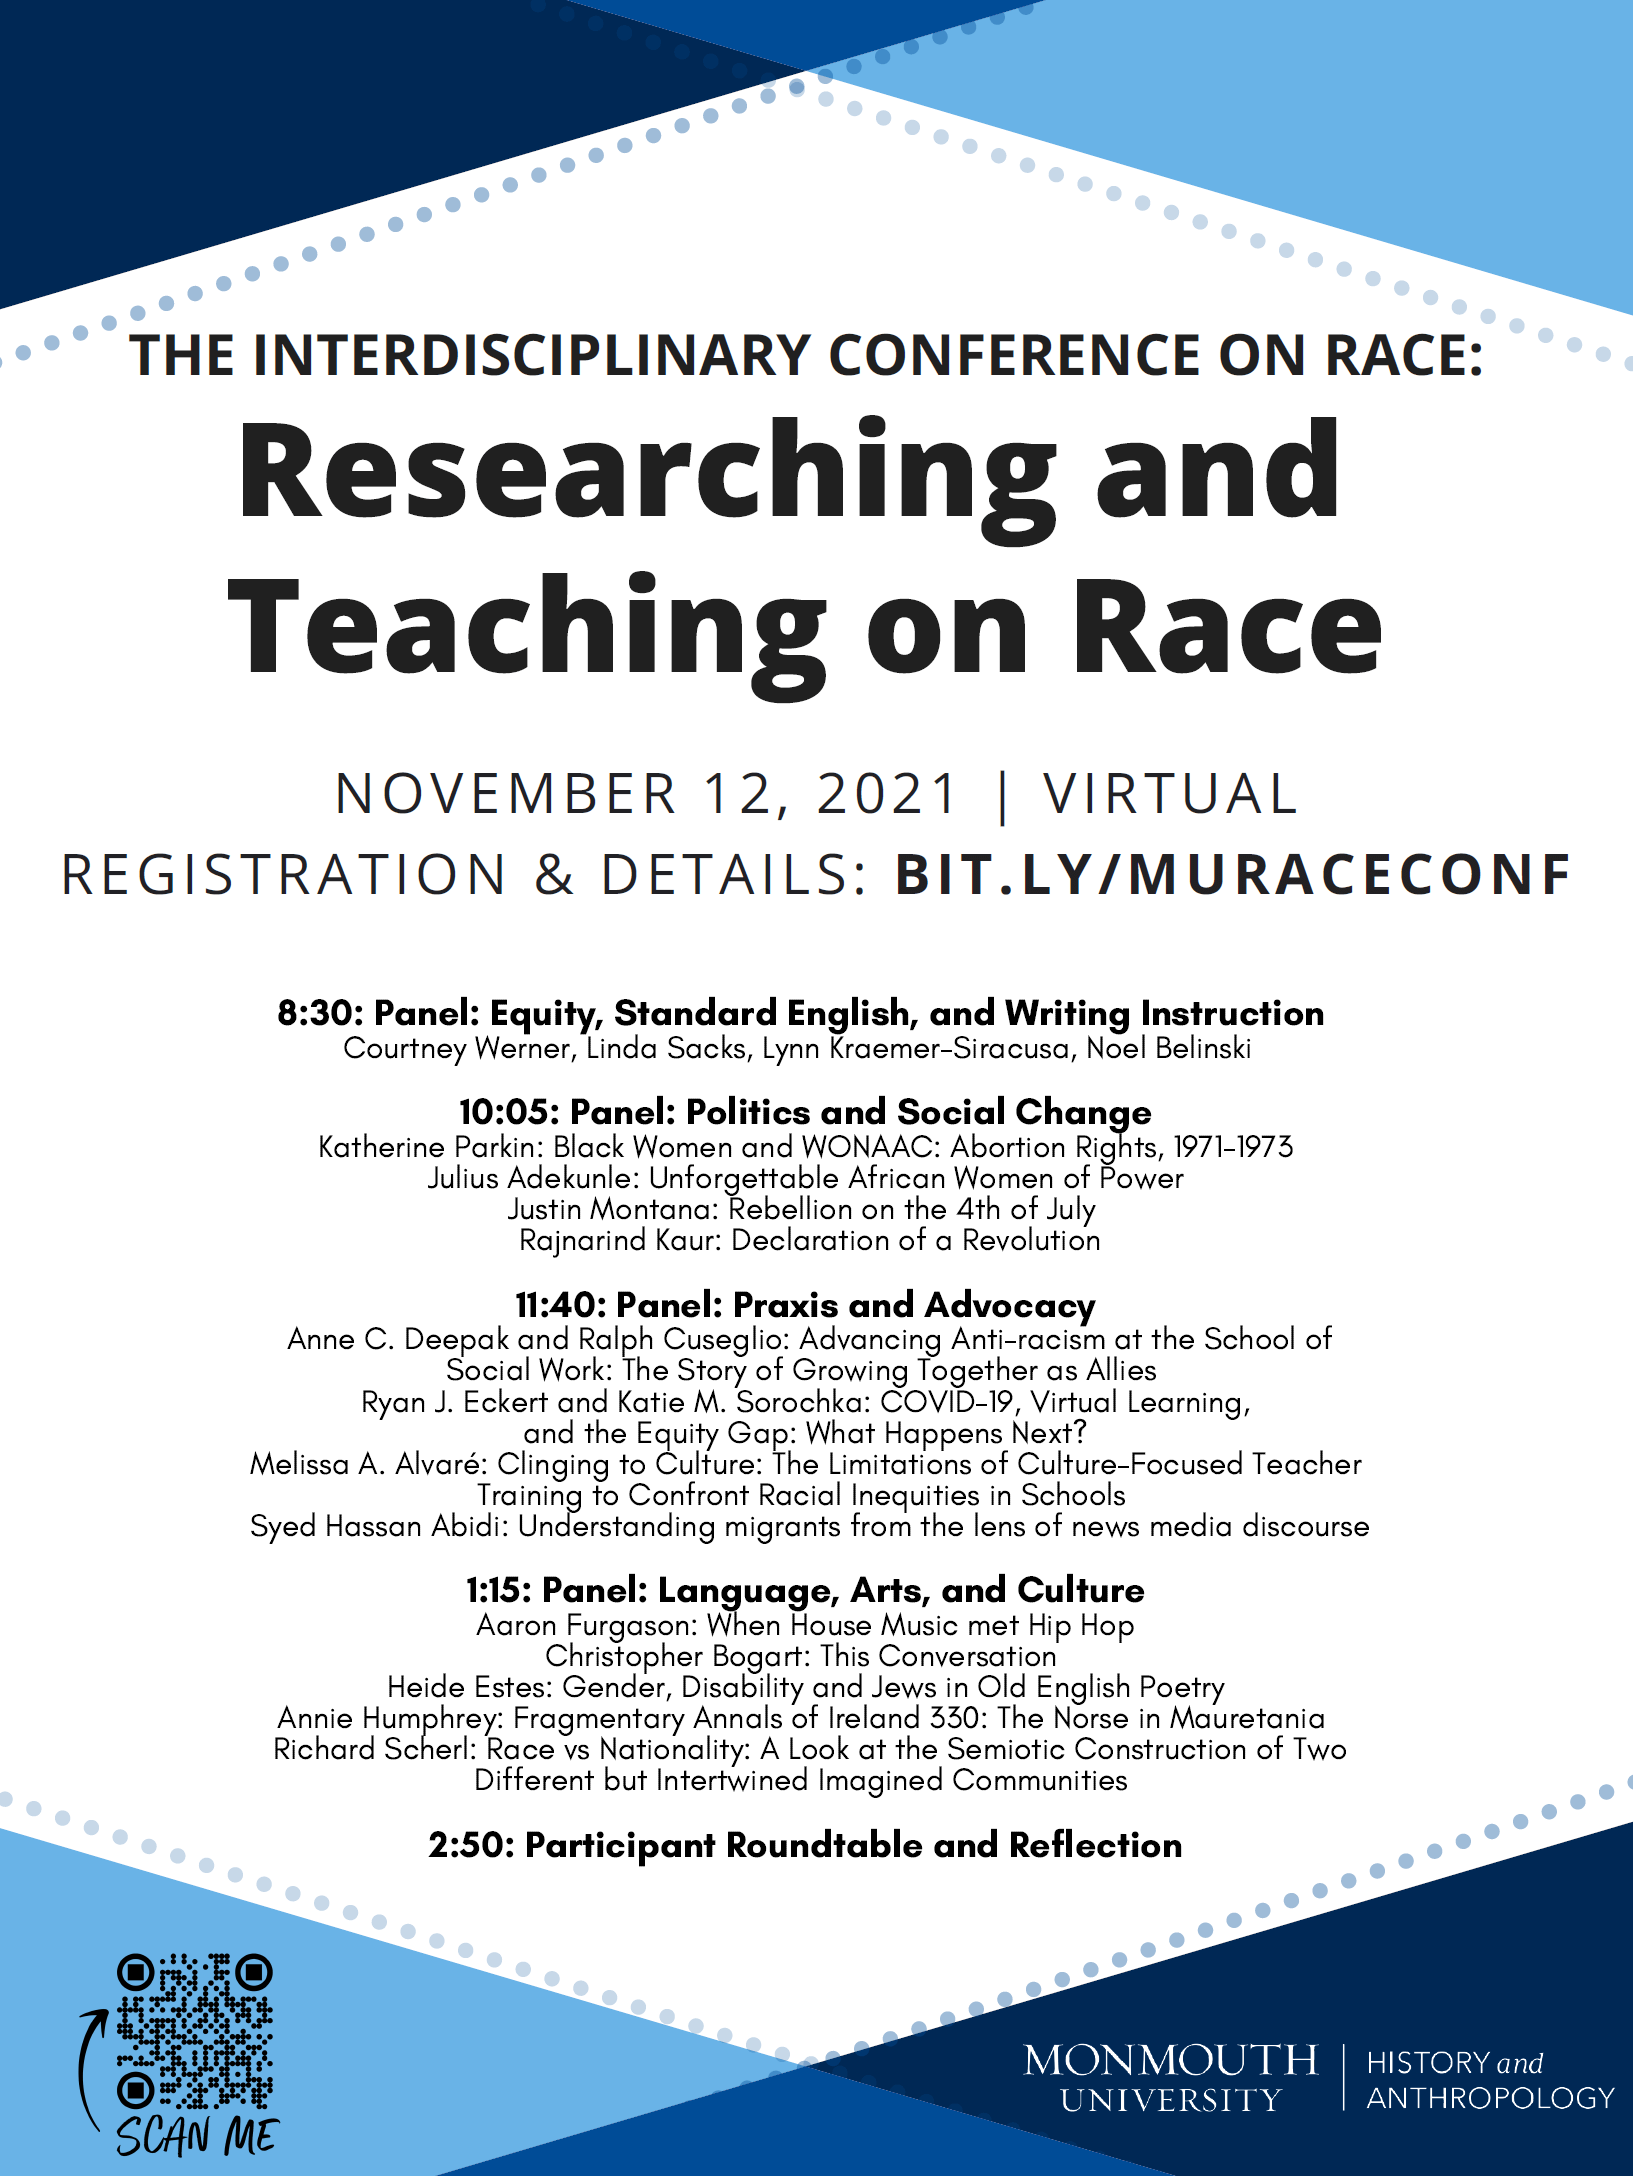 Image of Interdisciplinary Conf. on Race, 11.12.21. Go to History and Anthropology web pages.